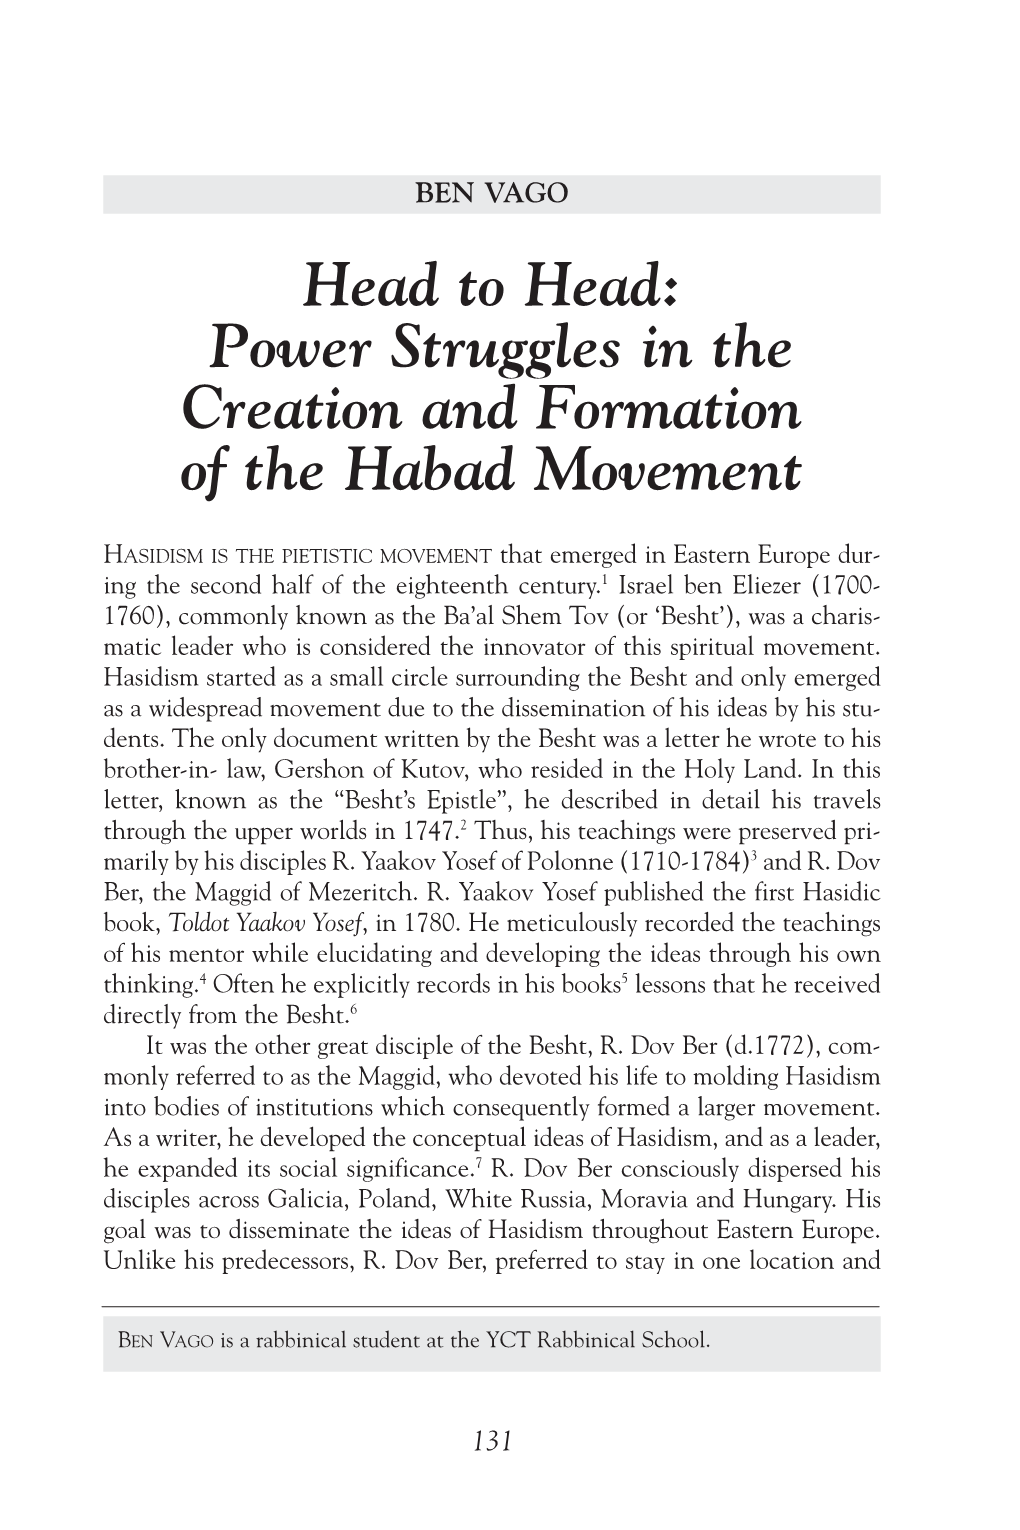 Head to Head: Power Struggles in the Creation and Formation of the Habad Movement